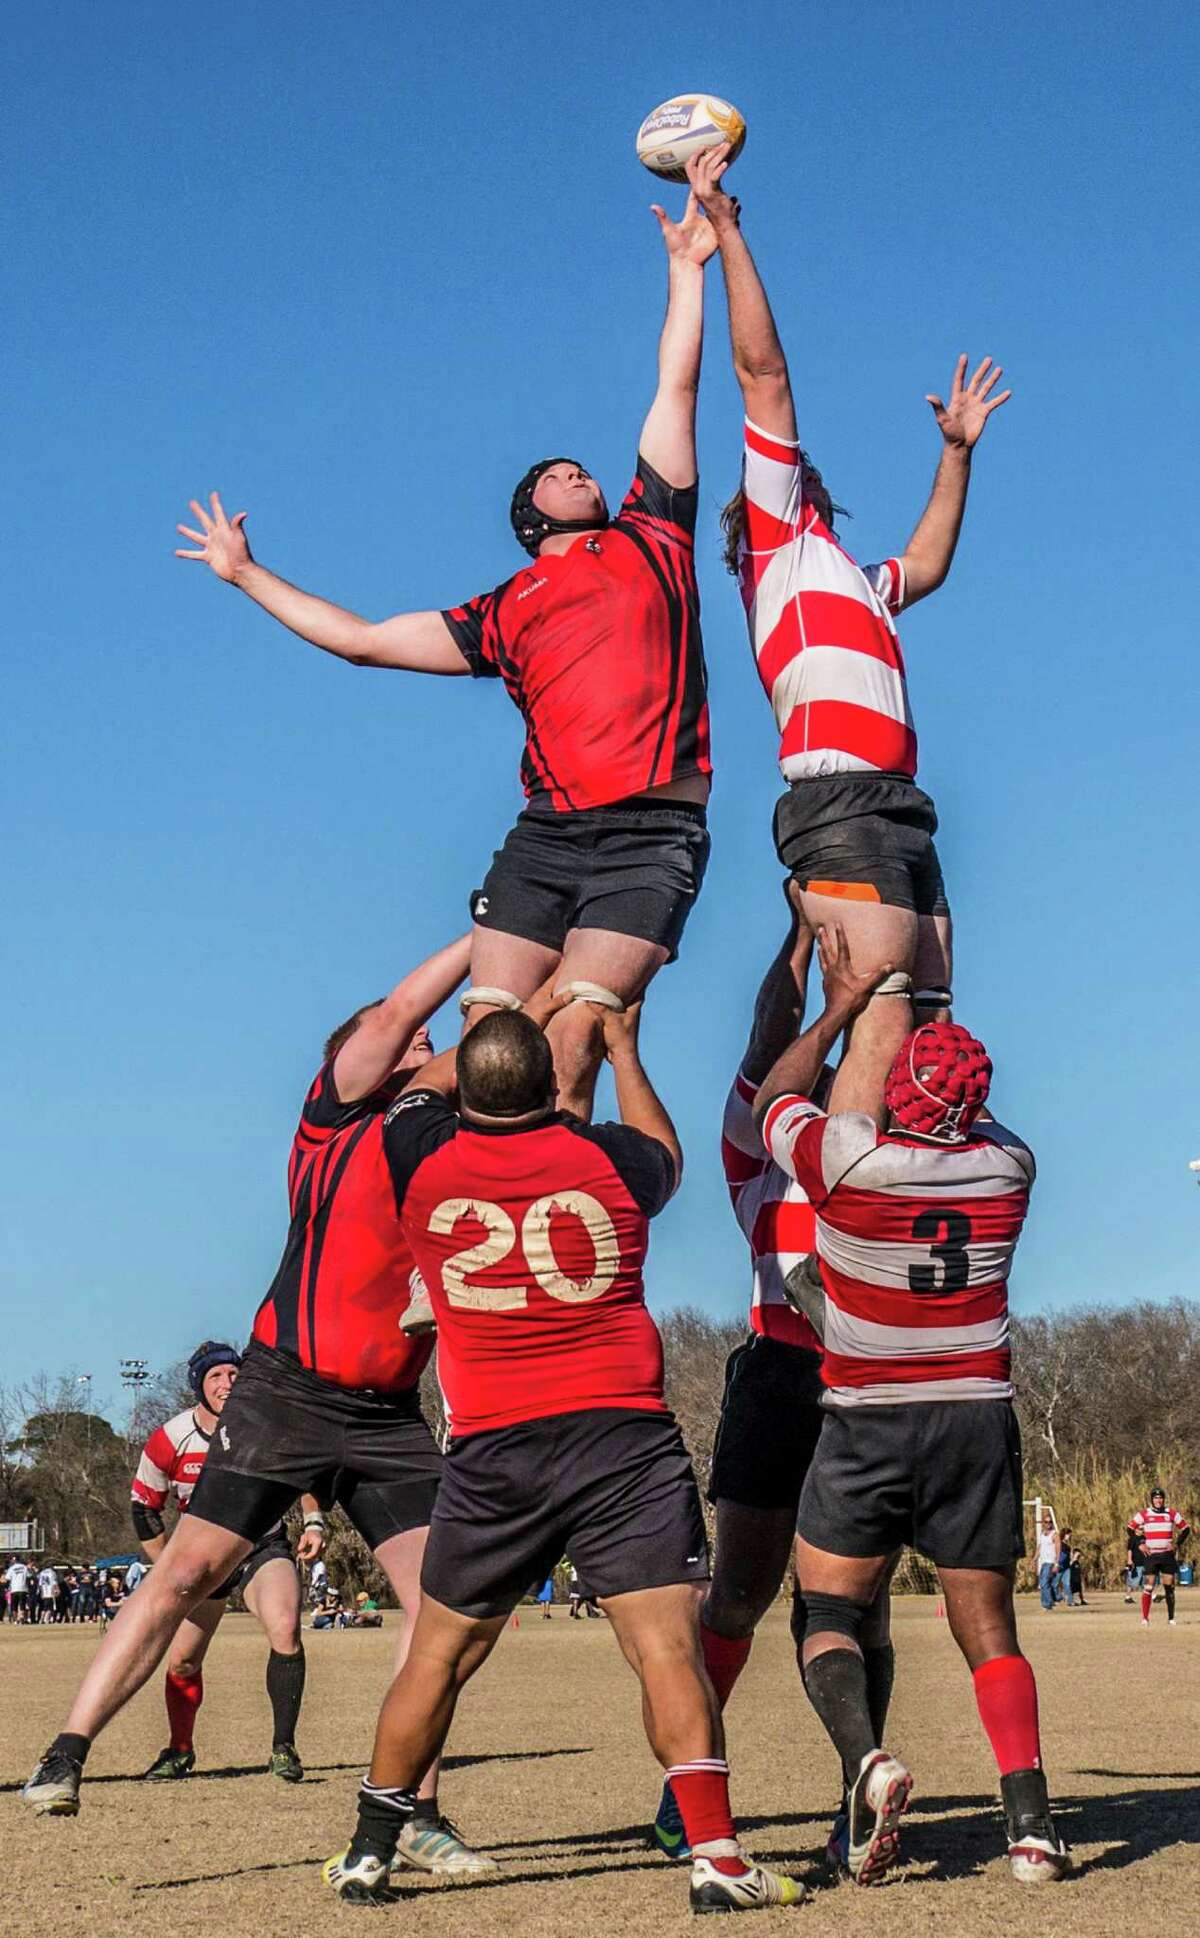 Sam Poindexter and Travis Martin fight for a line out - an inbounds play - during a scrimmage by the San Antonio Rugby Club. Photo by Joshua Trudell/For the Express-News